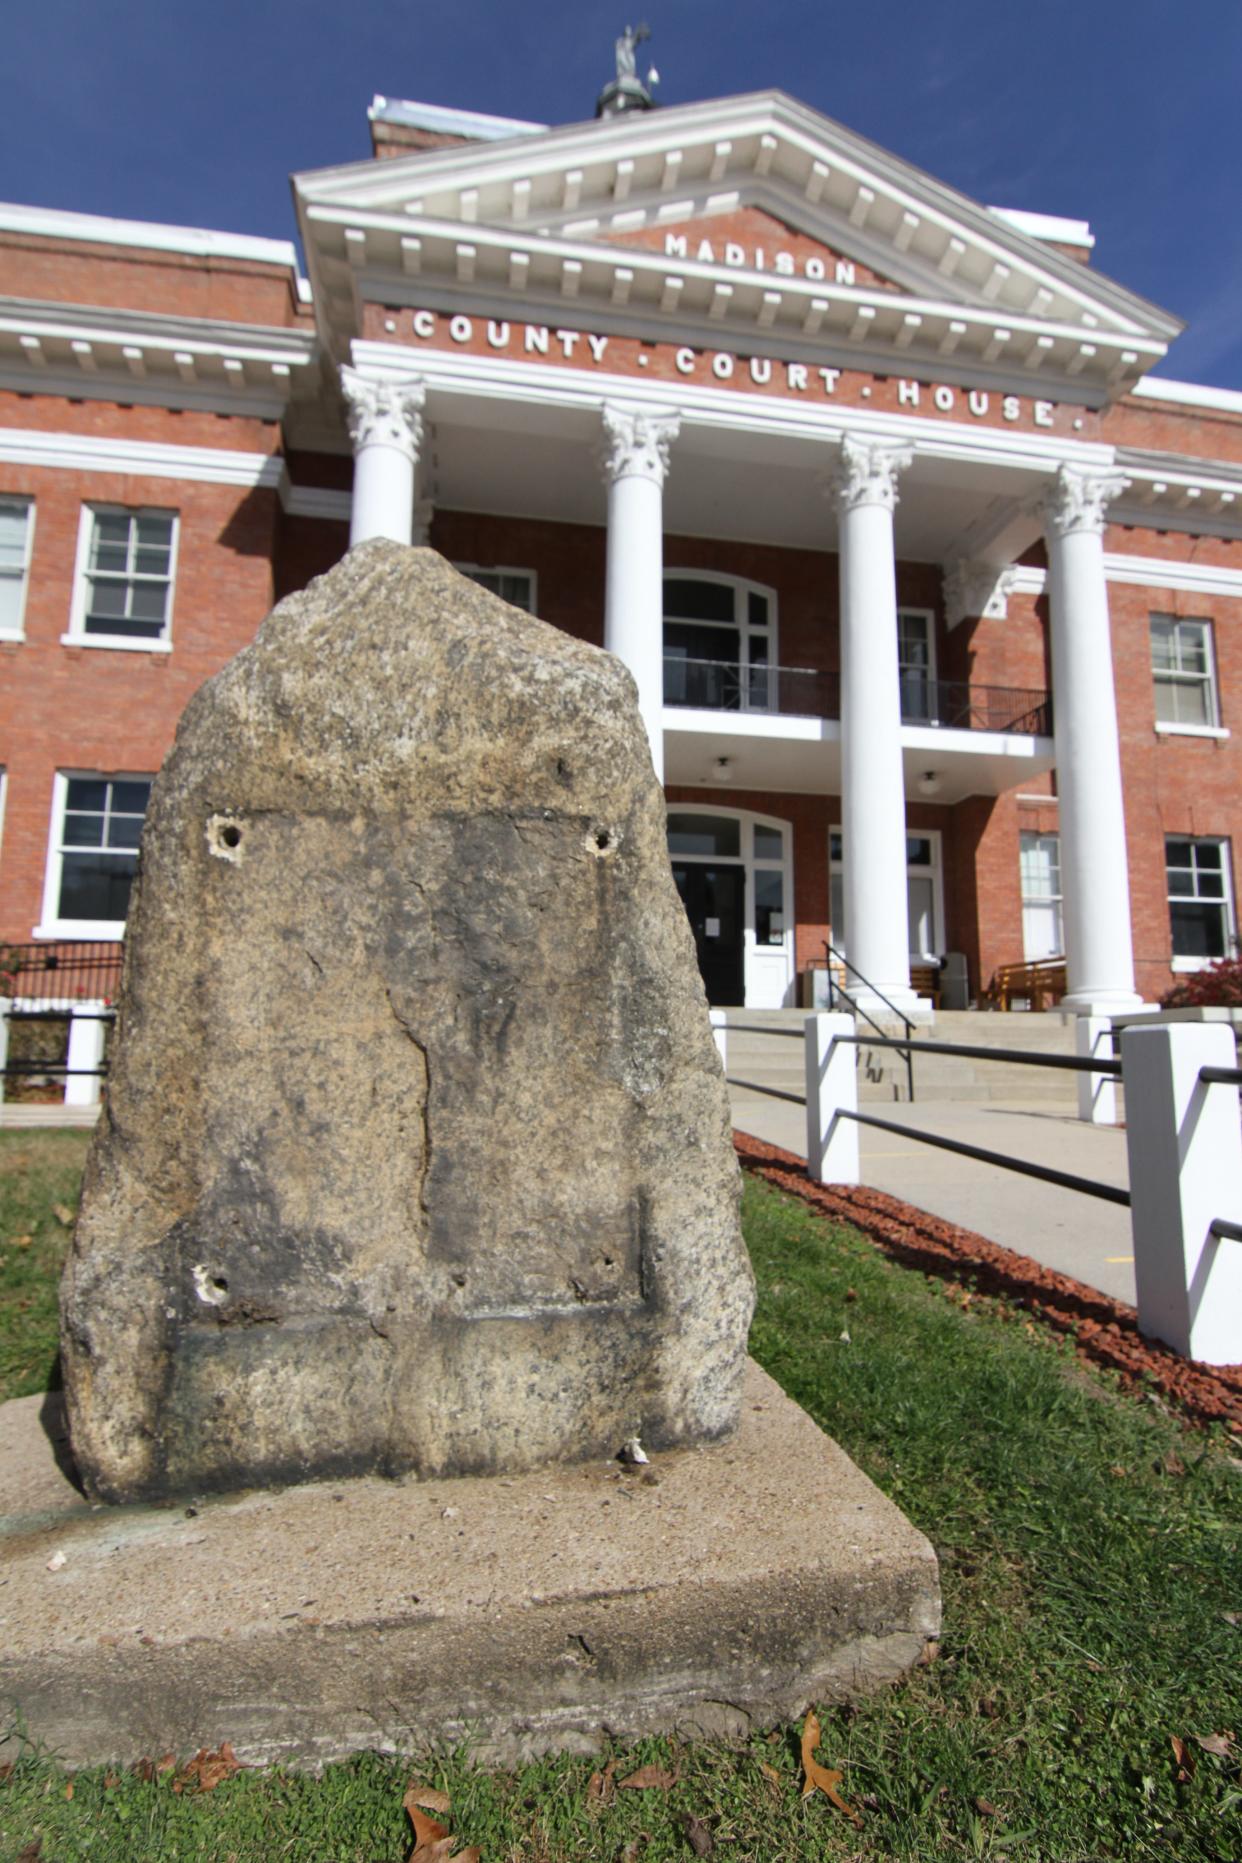 The Robert E. Lee Dixie Highway Marker plaque in Marshall was stolen off its monument in November 2020.